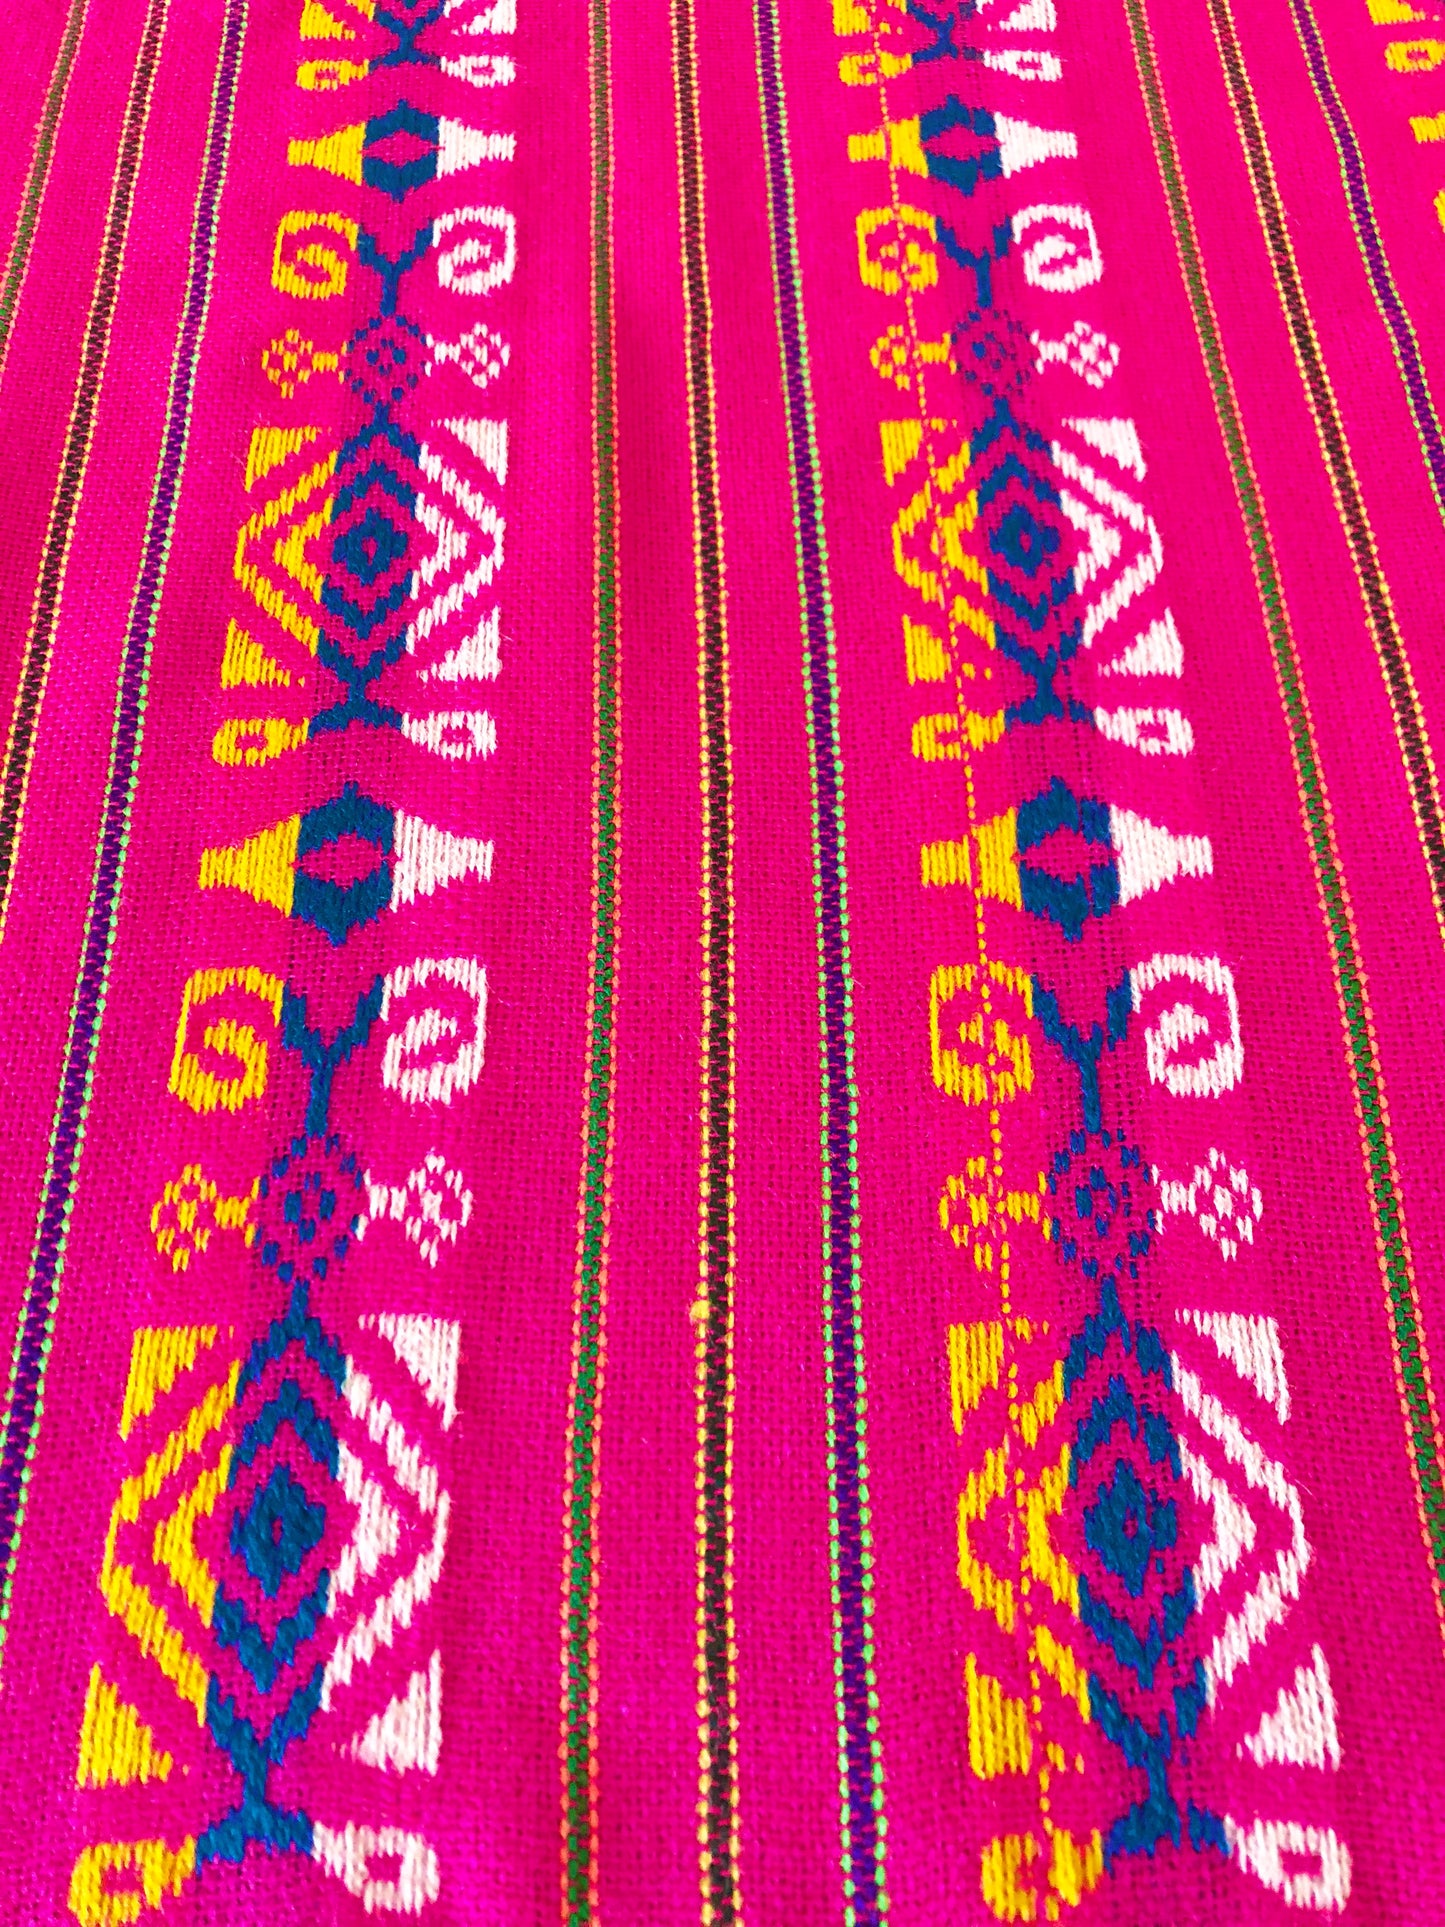 Mexican Fabric Table Runner - hot pink